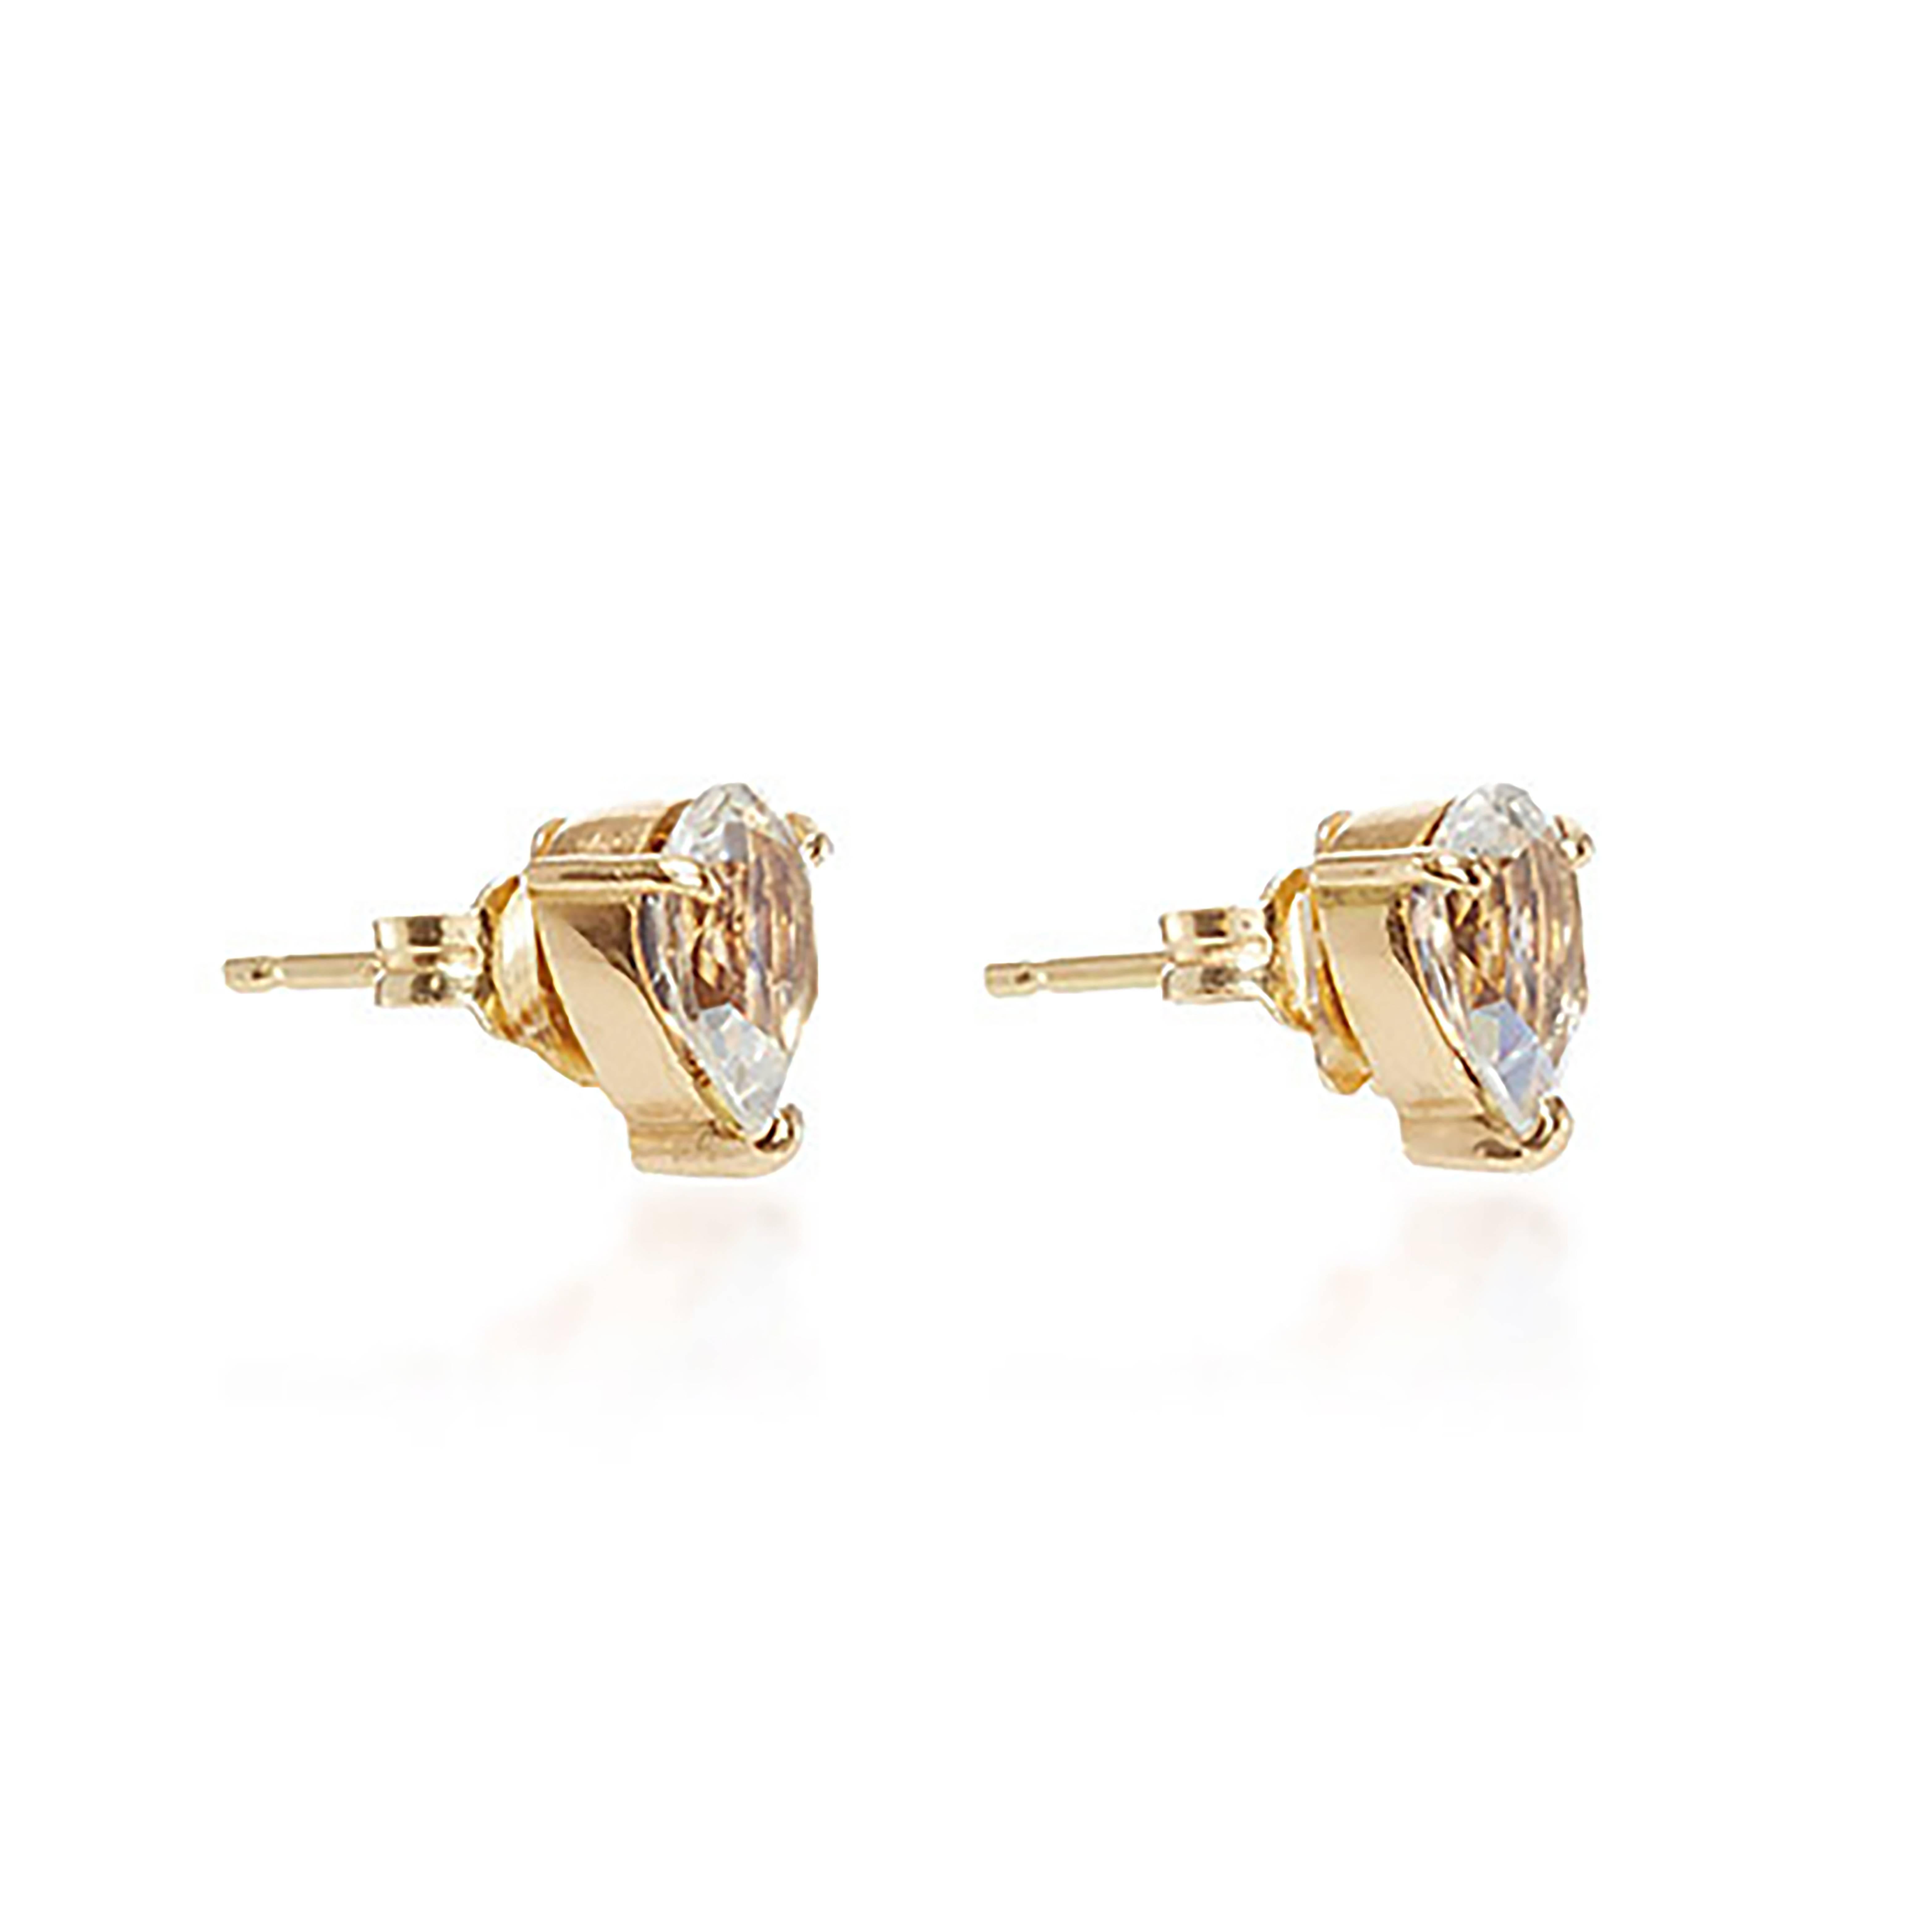 These DUBINI earrings from the 'Theodora' collection feature white topaz drops set in 18K yellow gold. 

…………………………………………………………………………………………………………………………………………………………………….

Inspired by Empress Theodora, wife of Justinian I, she was widely regarded as